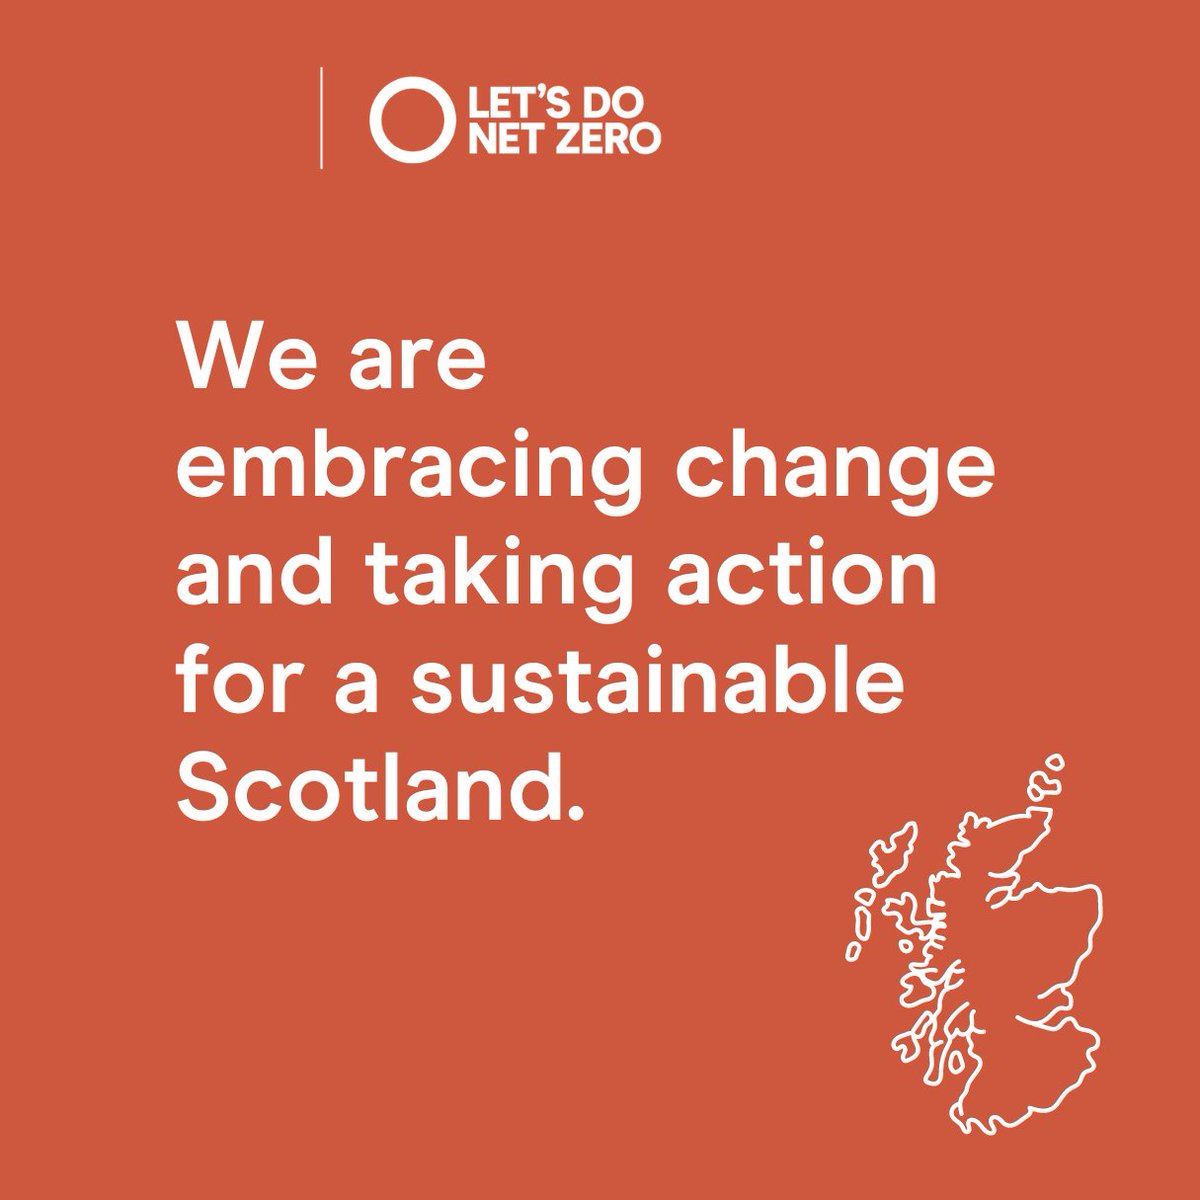 Every change counts towards our net zero future. Join us in embracing change and taking action for a sustainable Scotland. #LetsDoNetZero.